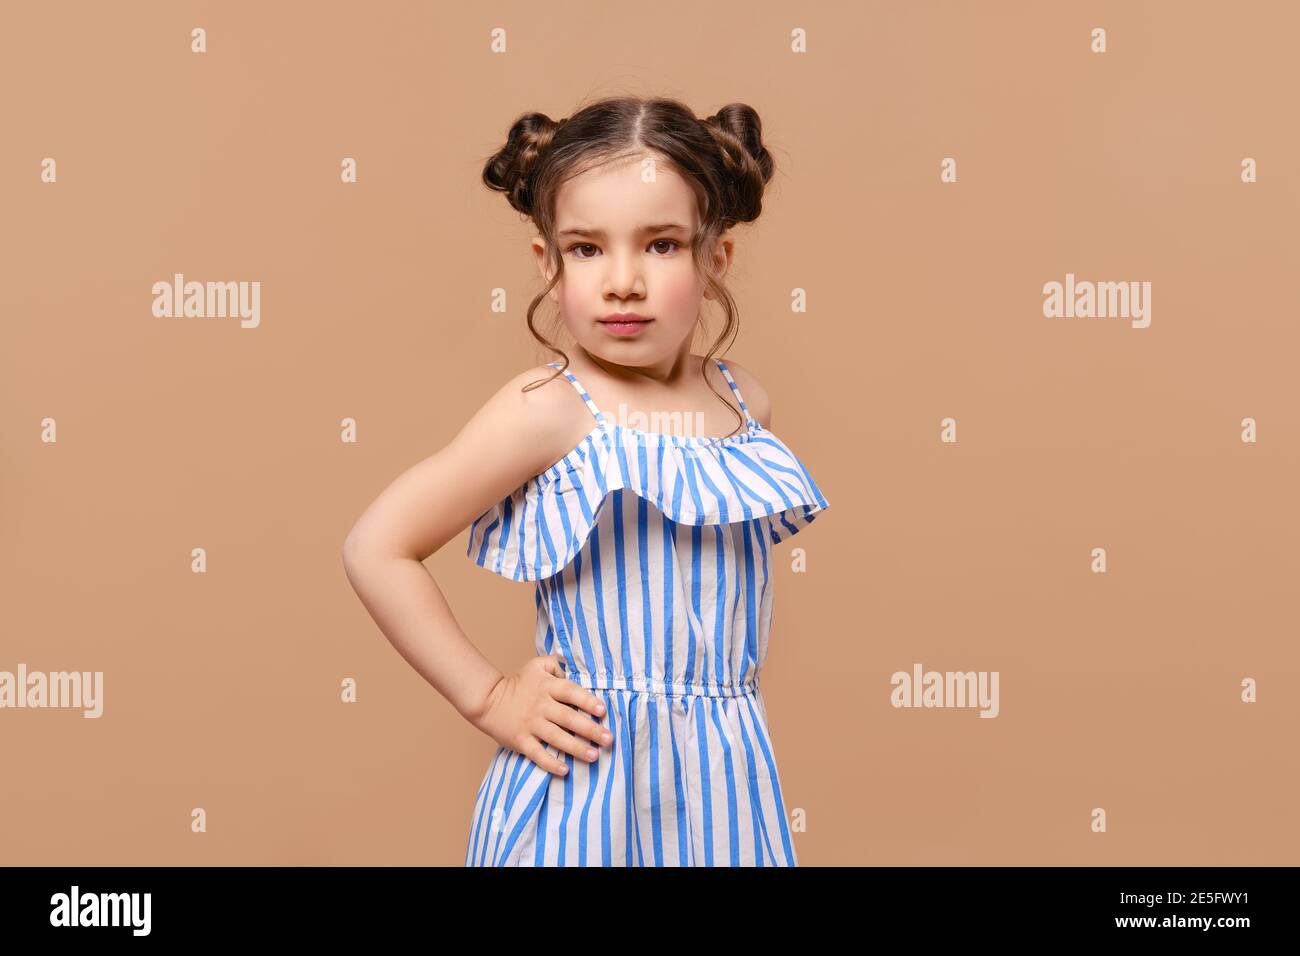 Portrait of cute young girl in sundress posing in studio Stock Photo